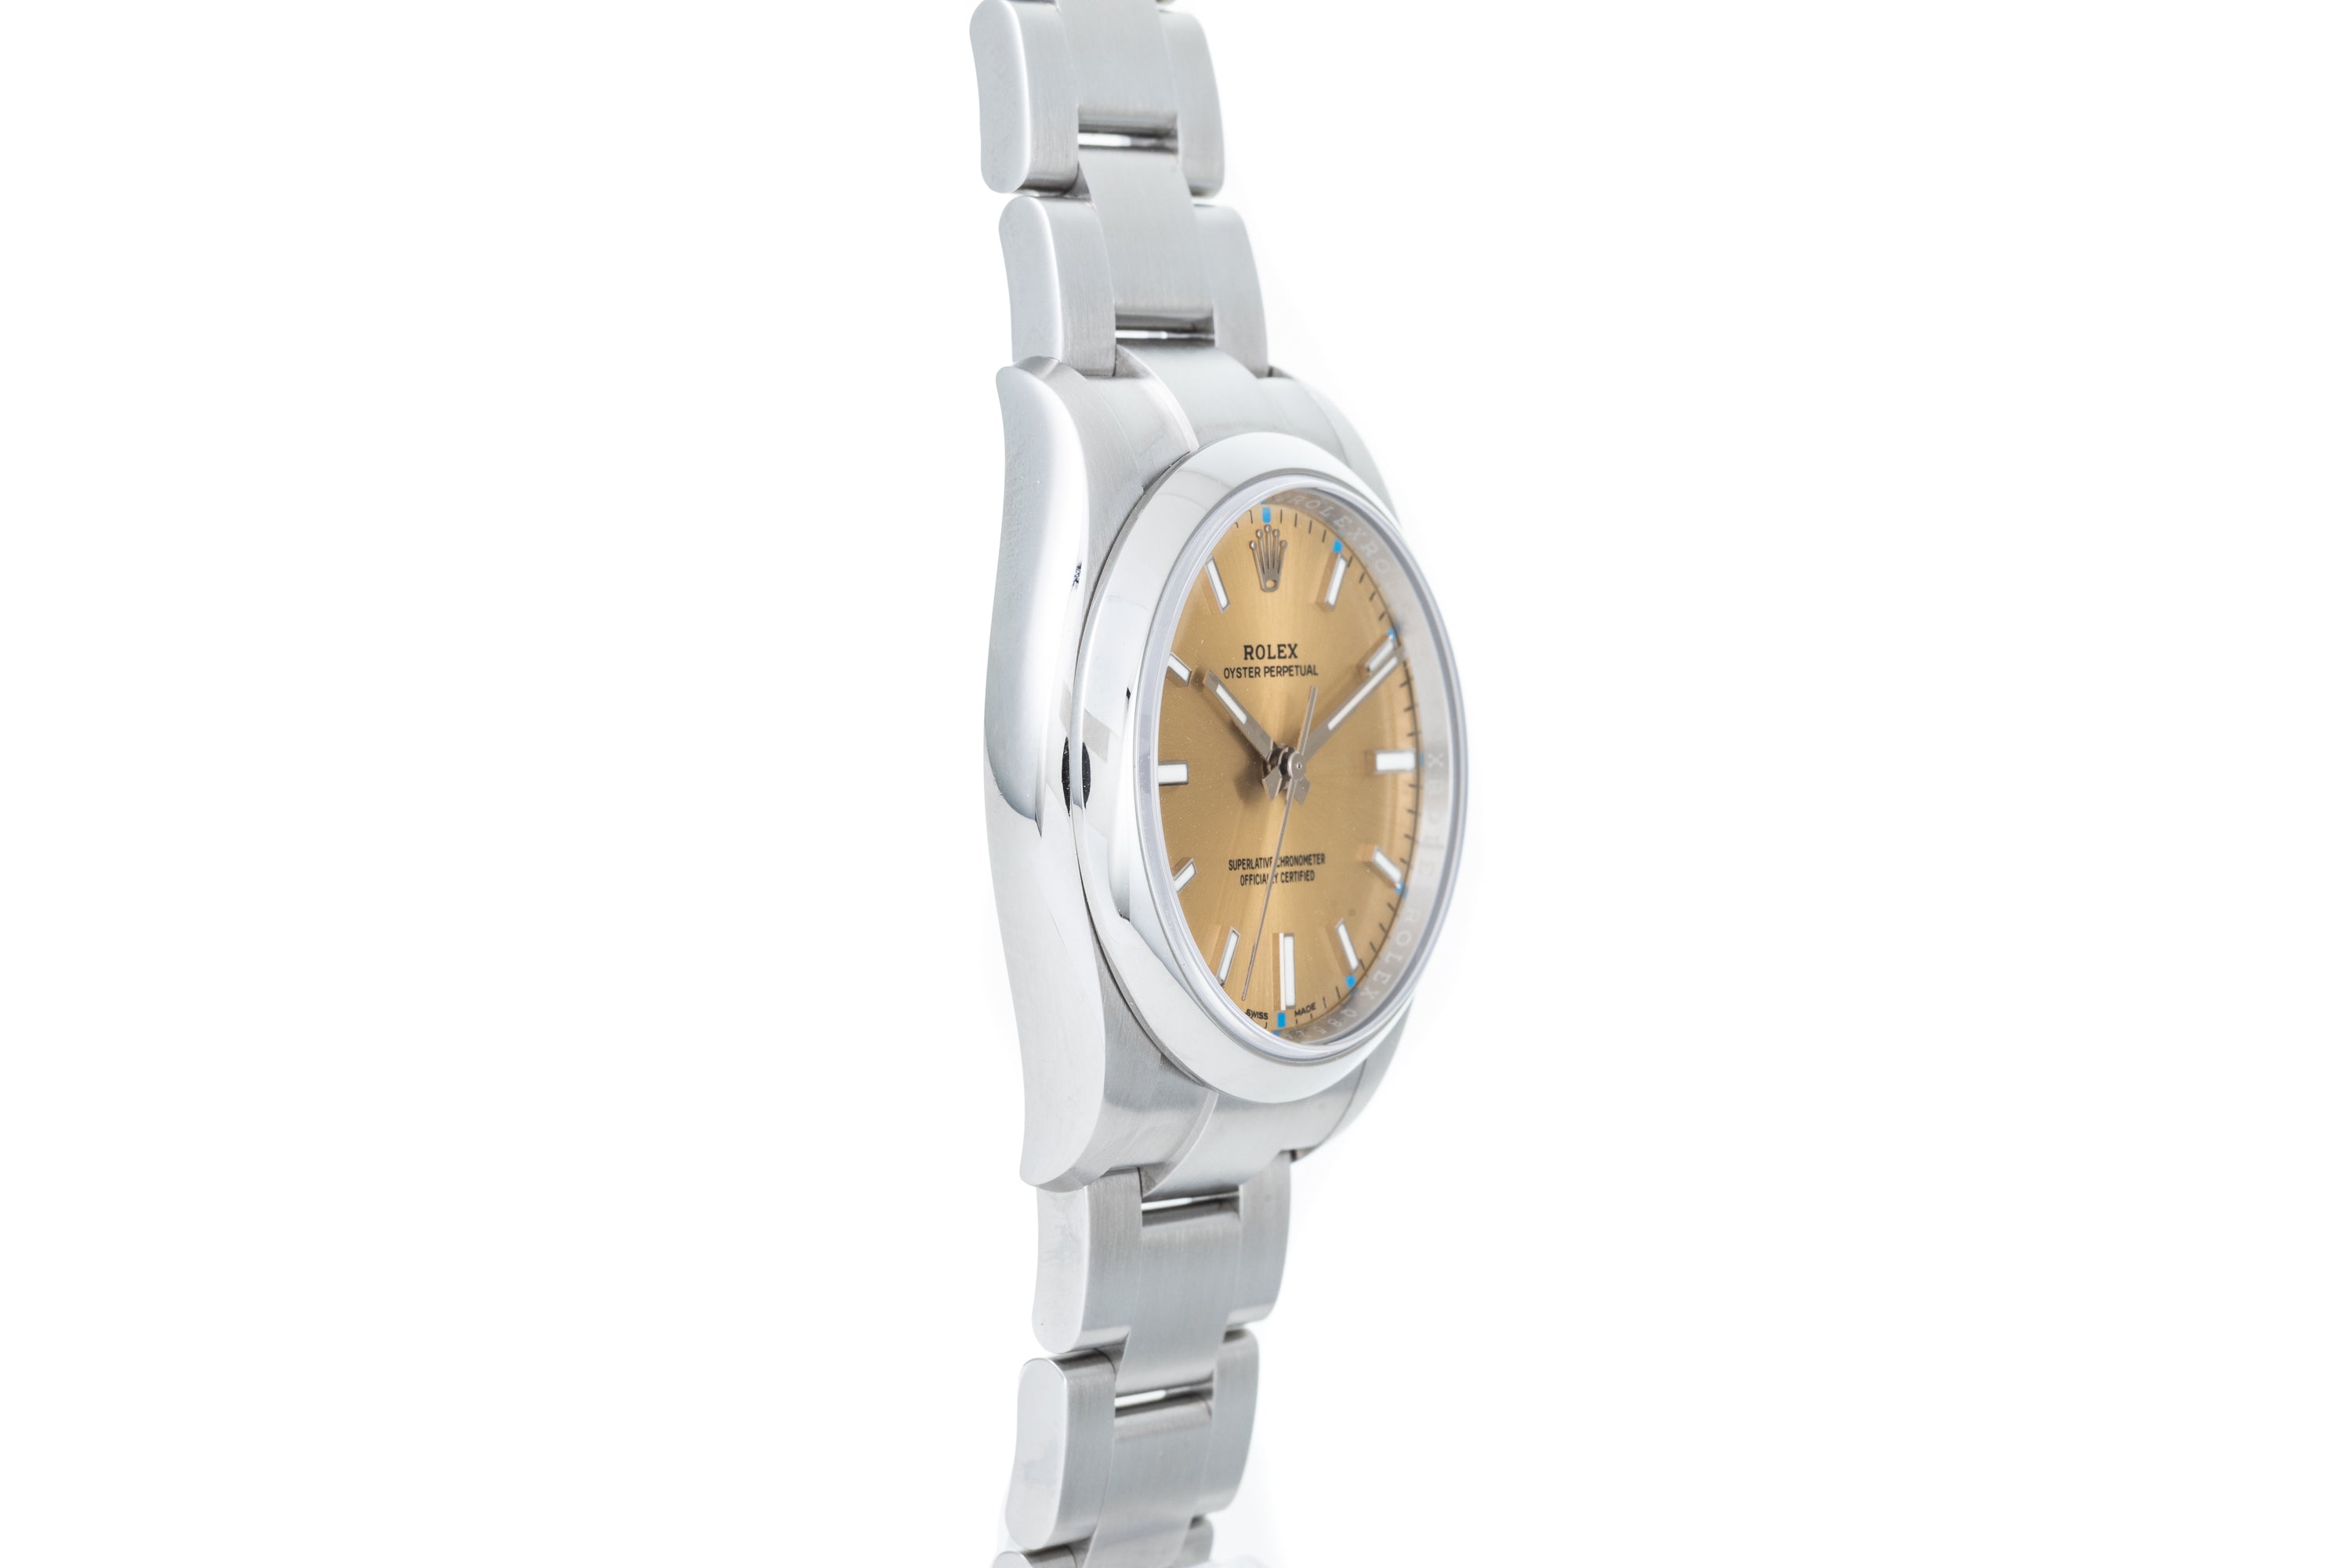 Rolex Oyster Perpetual 'White Grape' – Analog:Shift